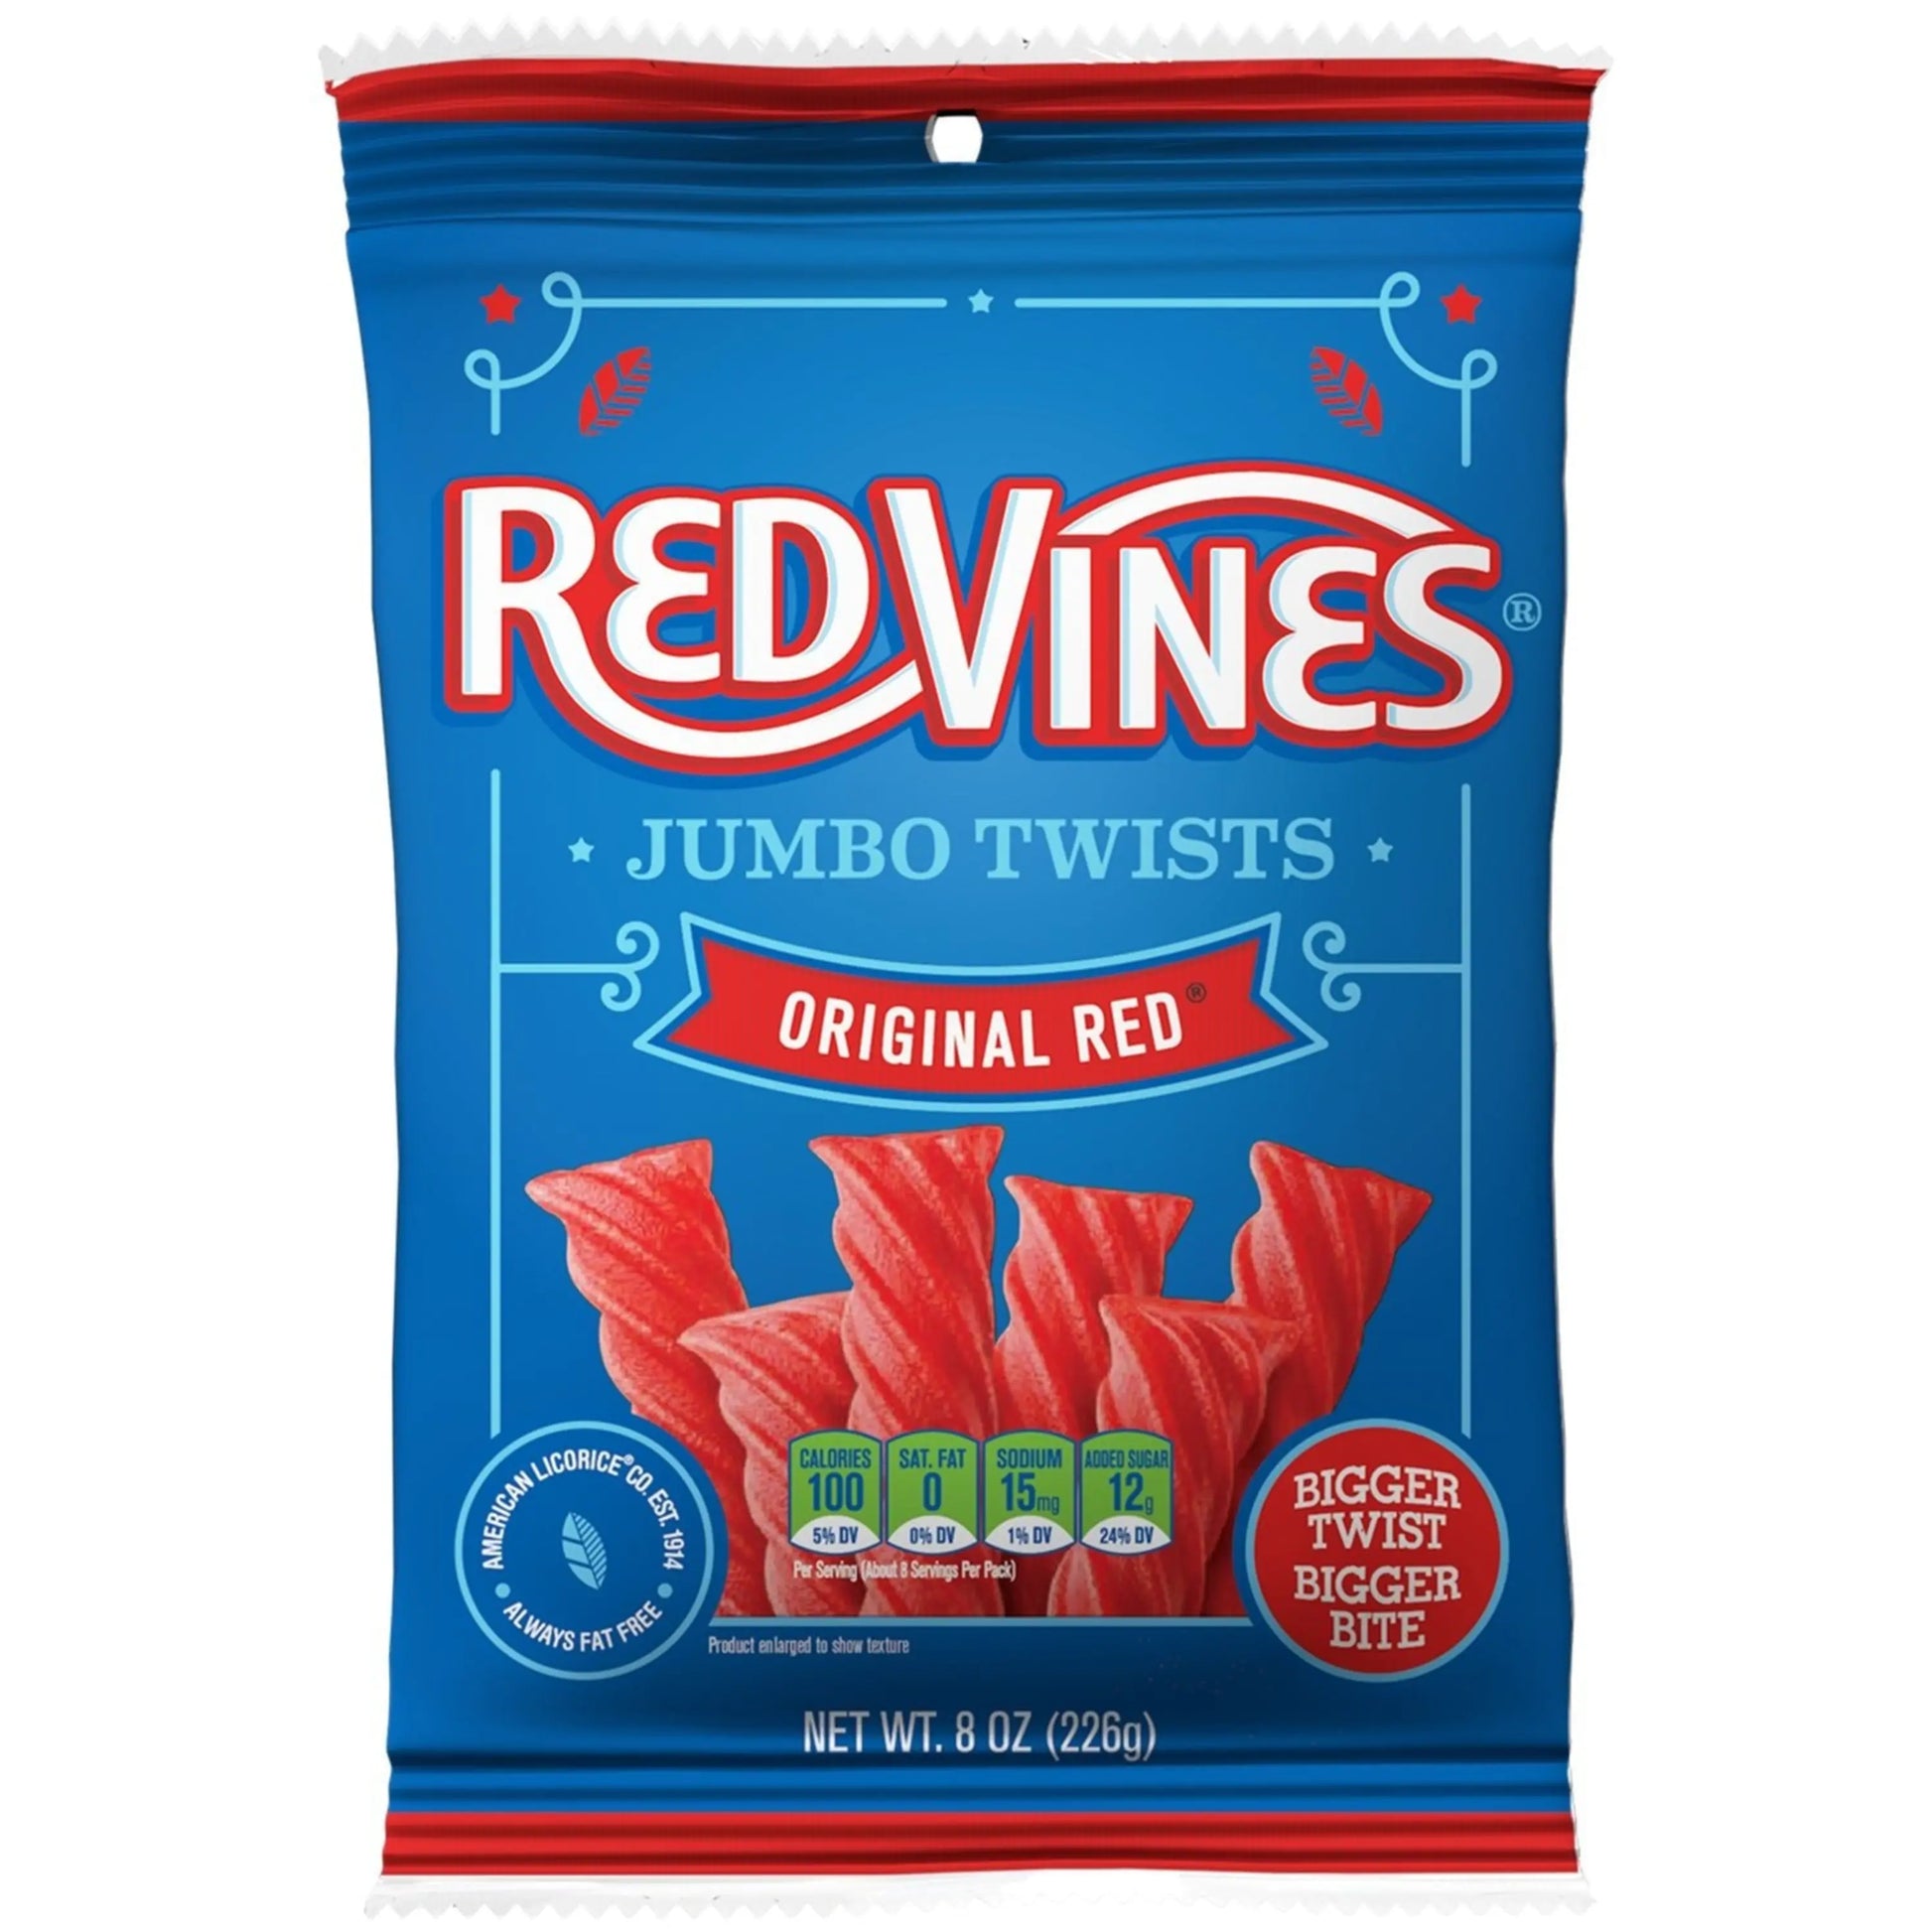 RED VINES Jumbo Original Red Licorice Twists front of 8oz package